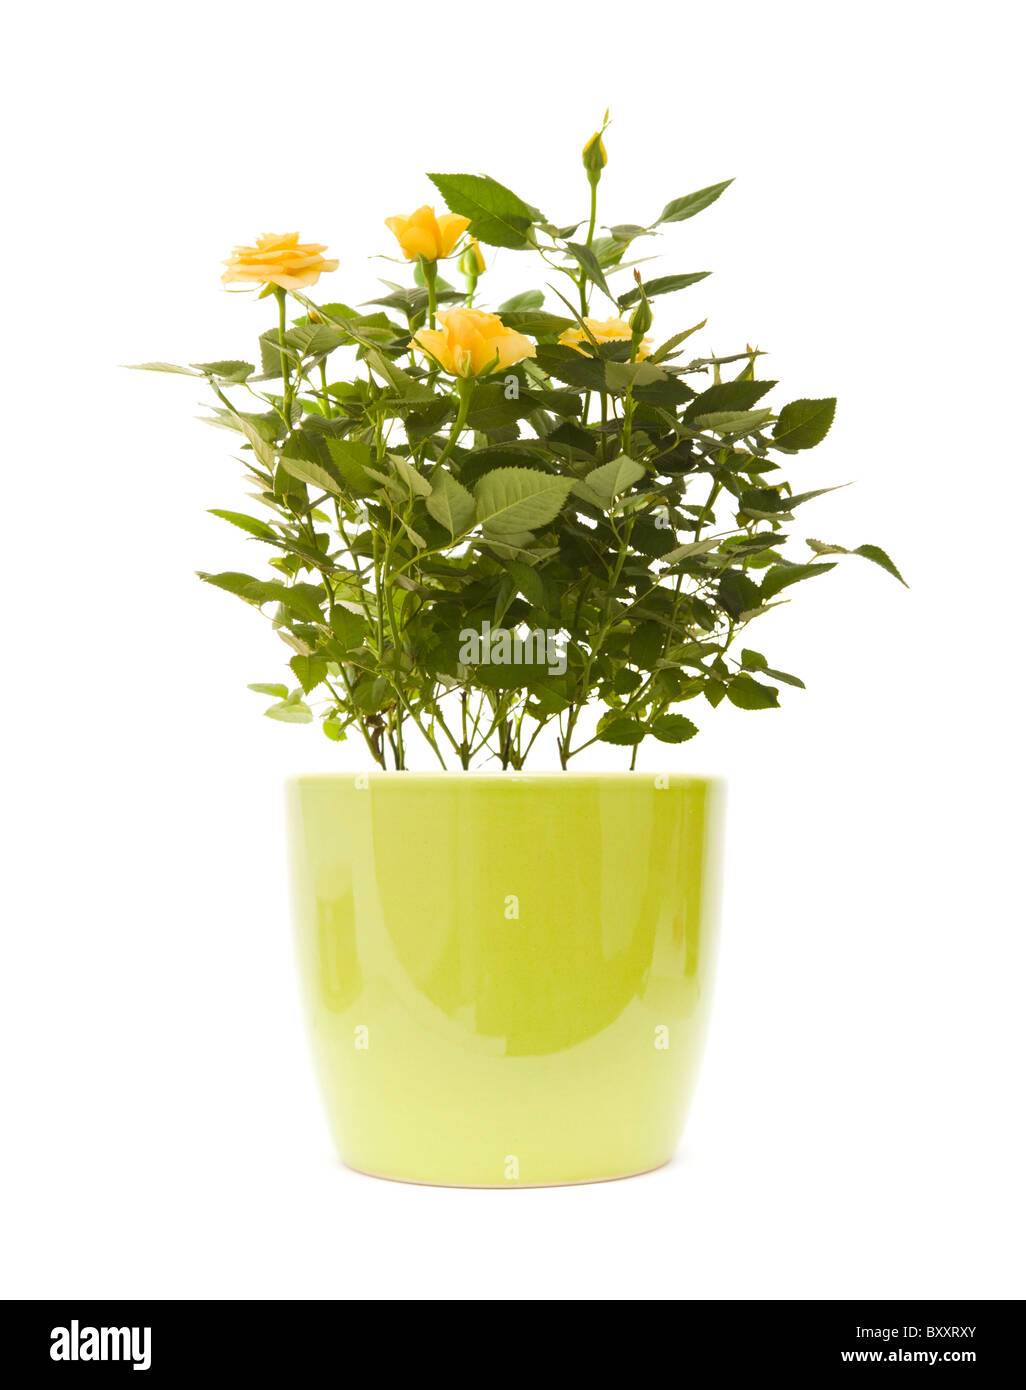 yellow mini rose bush in light green pot; isolated on white background; Stock Photo